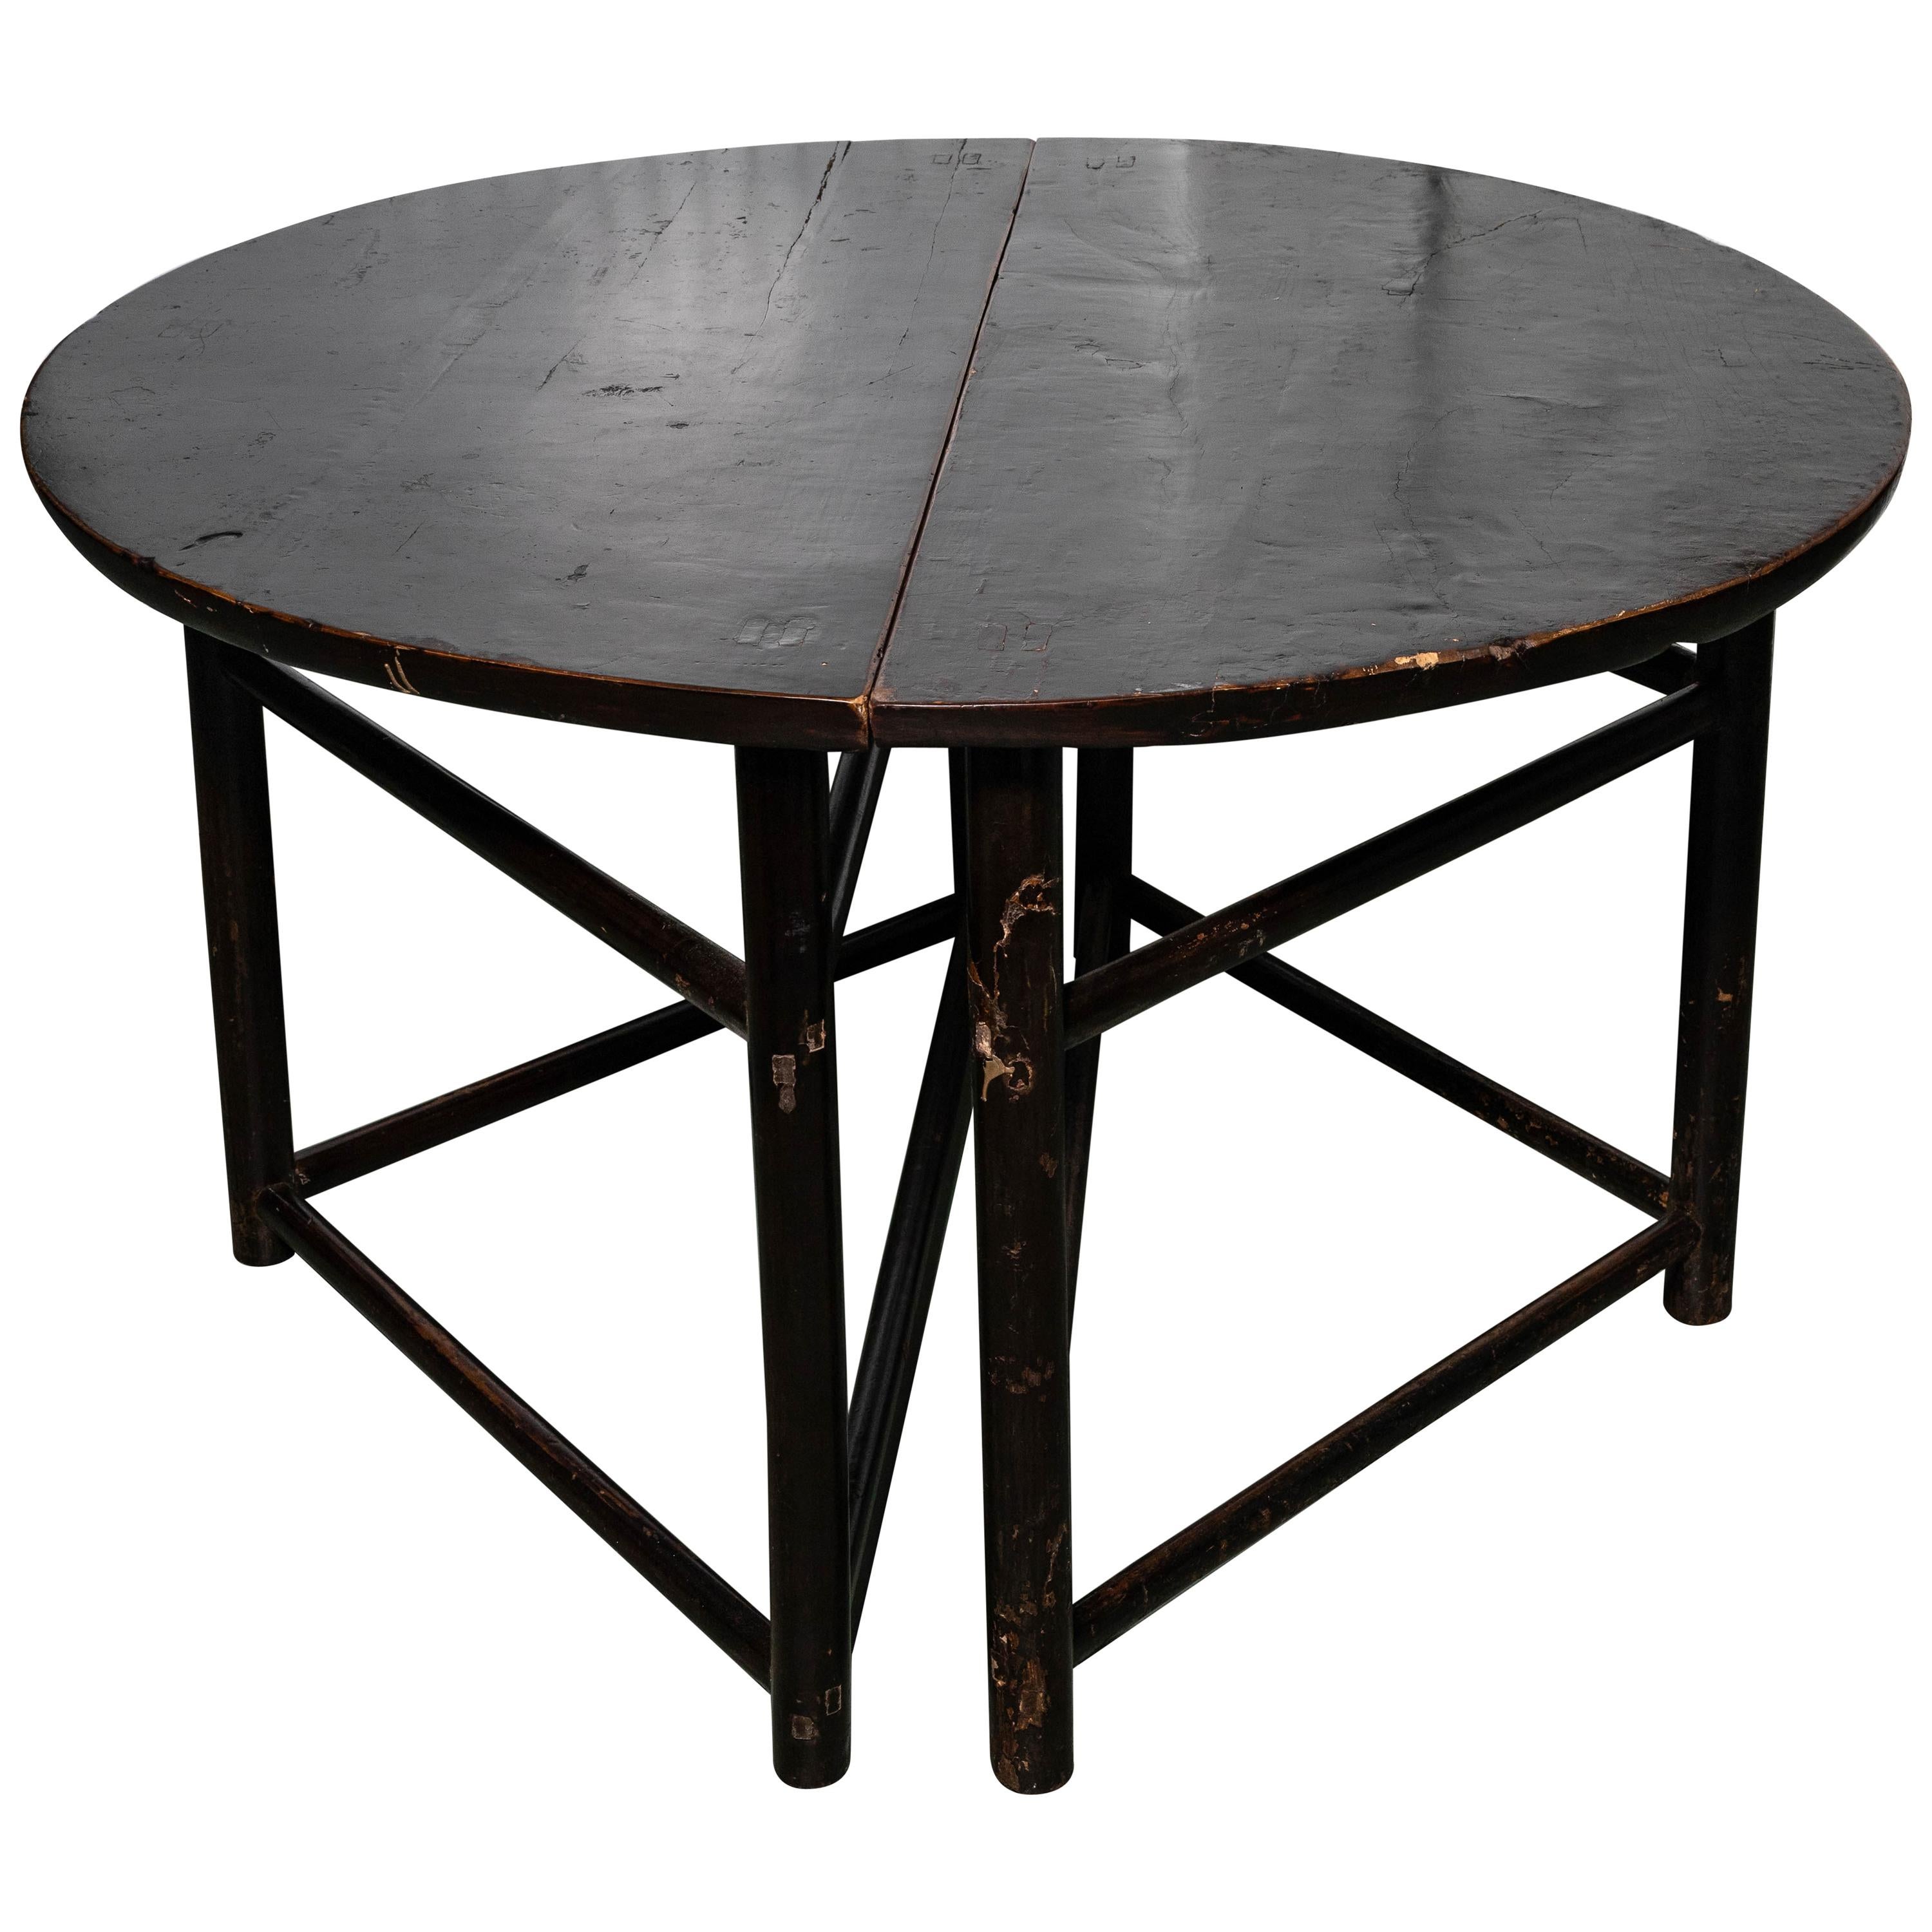 Pair of Asian Style Demilune Black Lacquer Tables